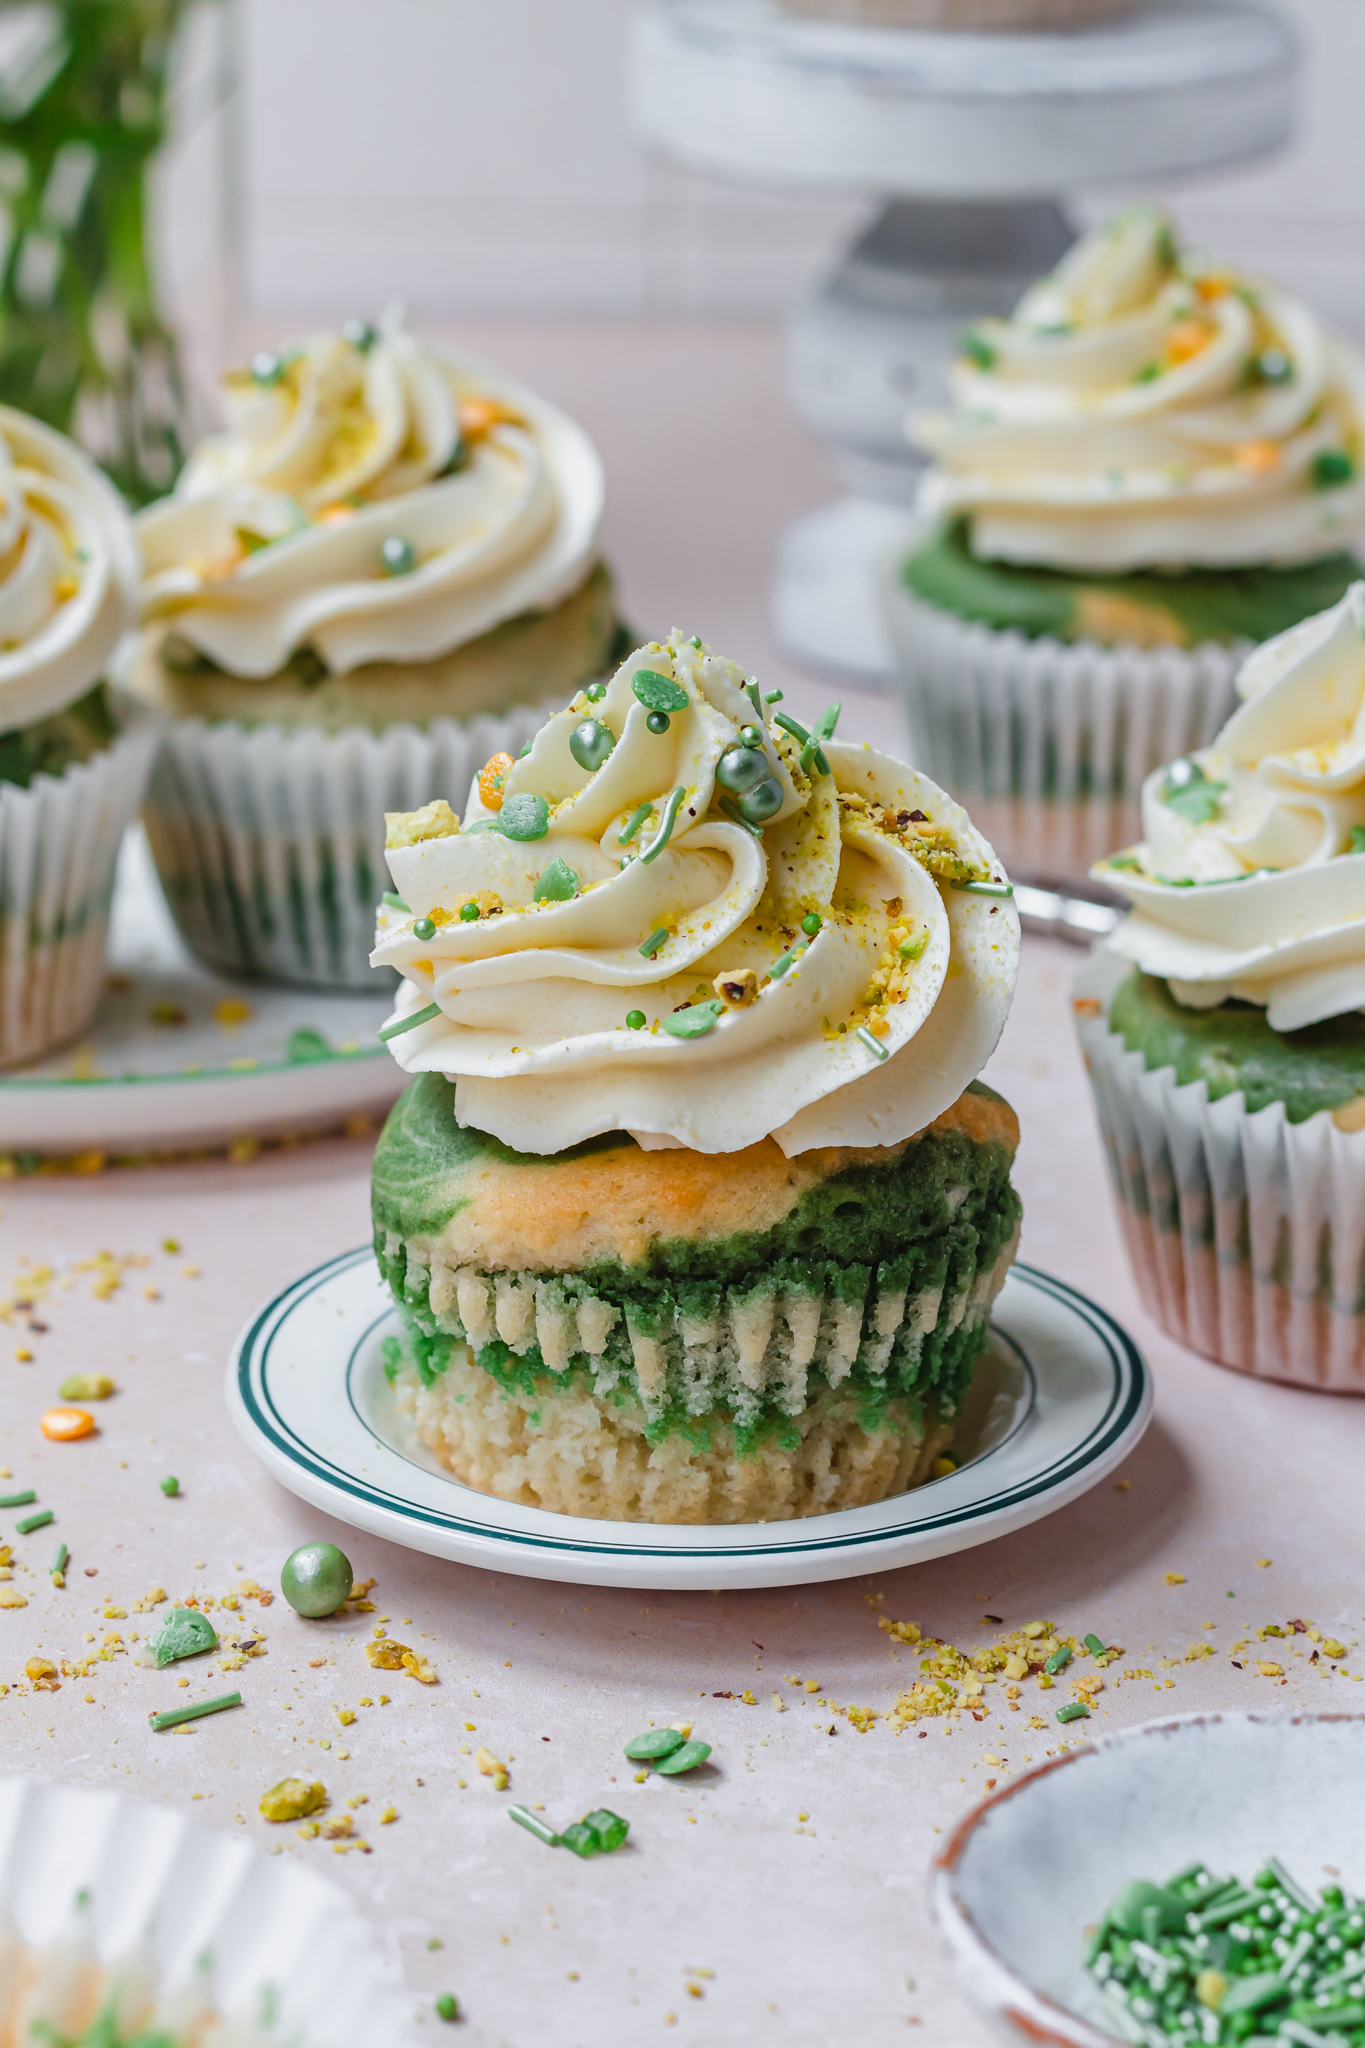 A St Patrick's Day Vegan Cupcake on a plate